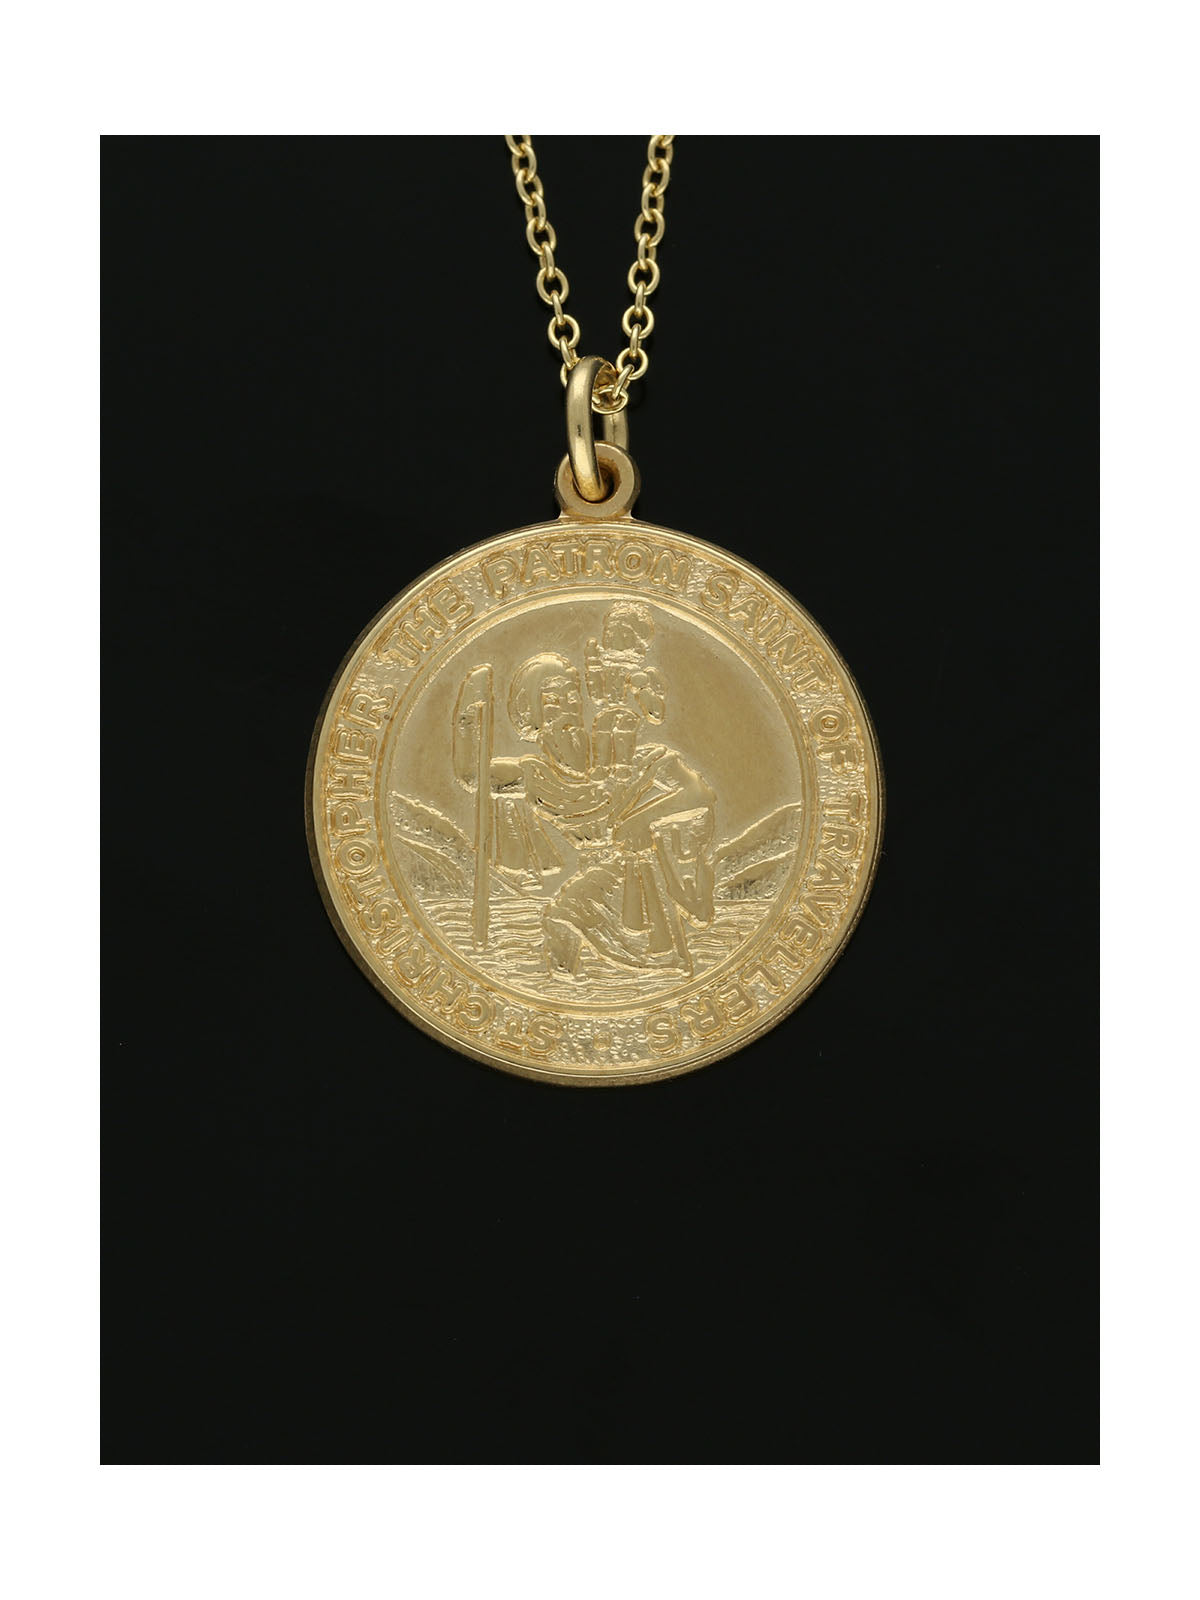 St Christopher Pedant Necklace 20mm in 9ct Yellow Gold